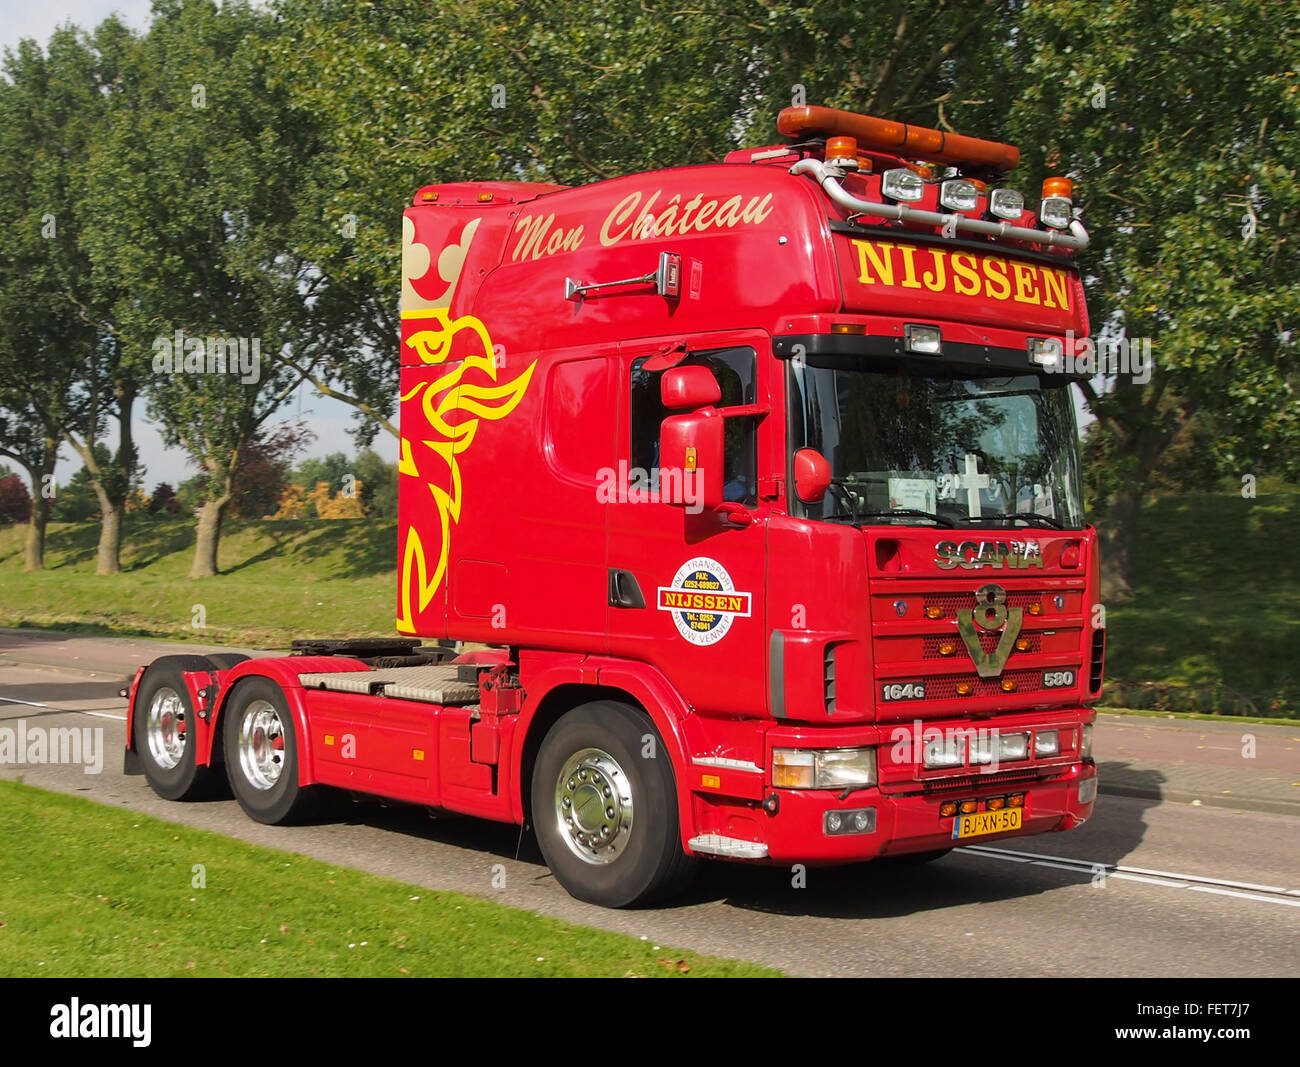 350+ Scania Truck Stock Photos, Pictures & Royalty-Free Images